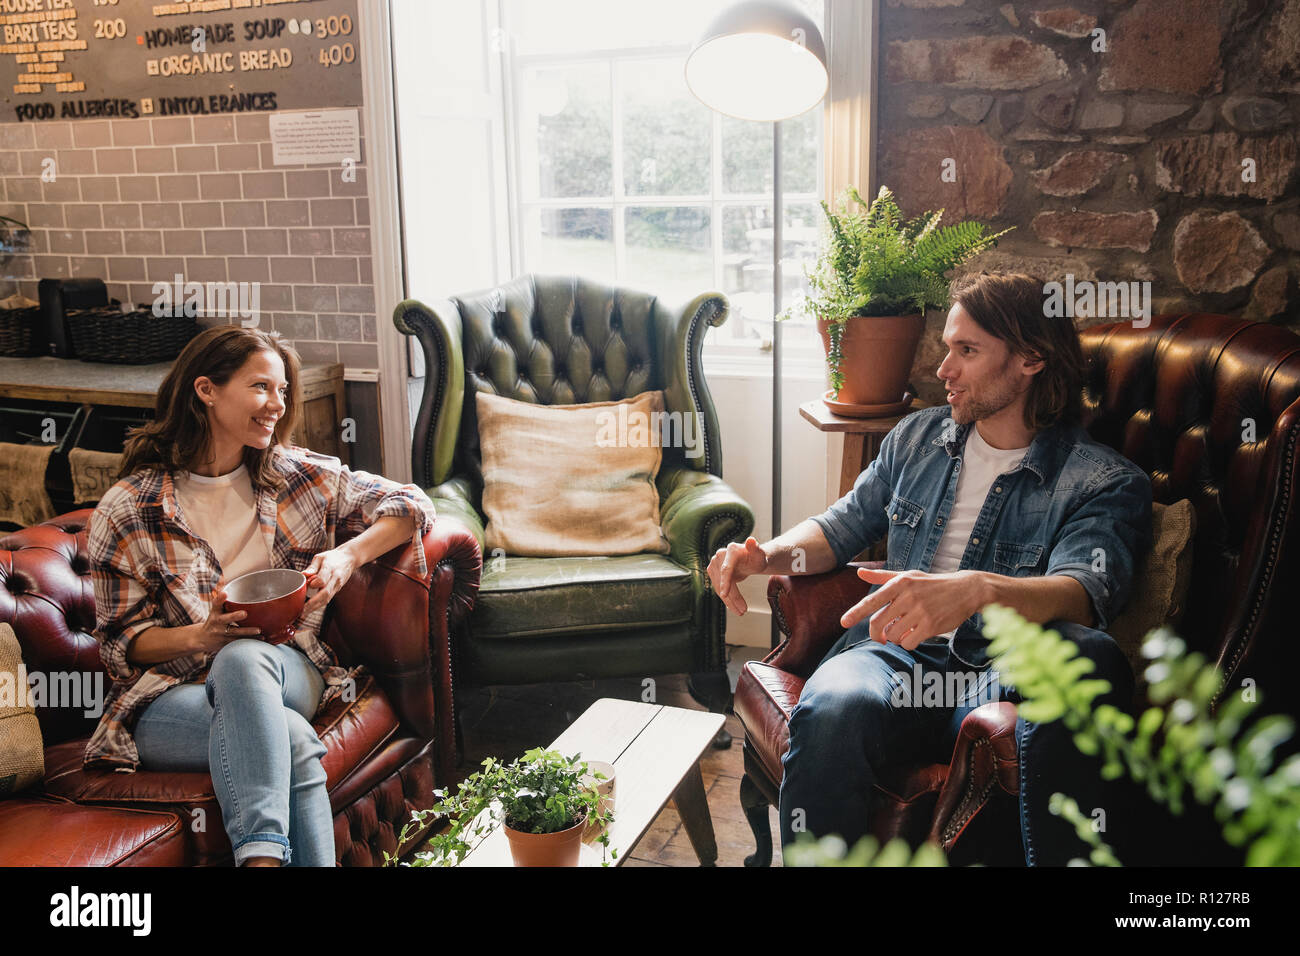 Mid-adult couple sitting in a small coffee shop relaxing. They are sitting on leather sofas and enjoying a coffee while talking. Stock Photo